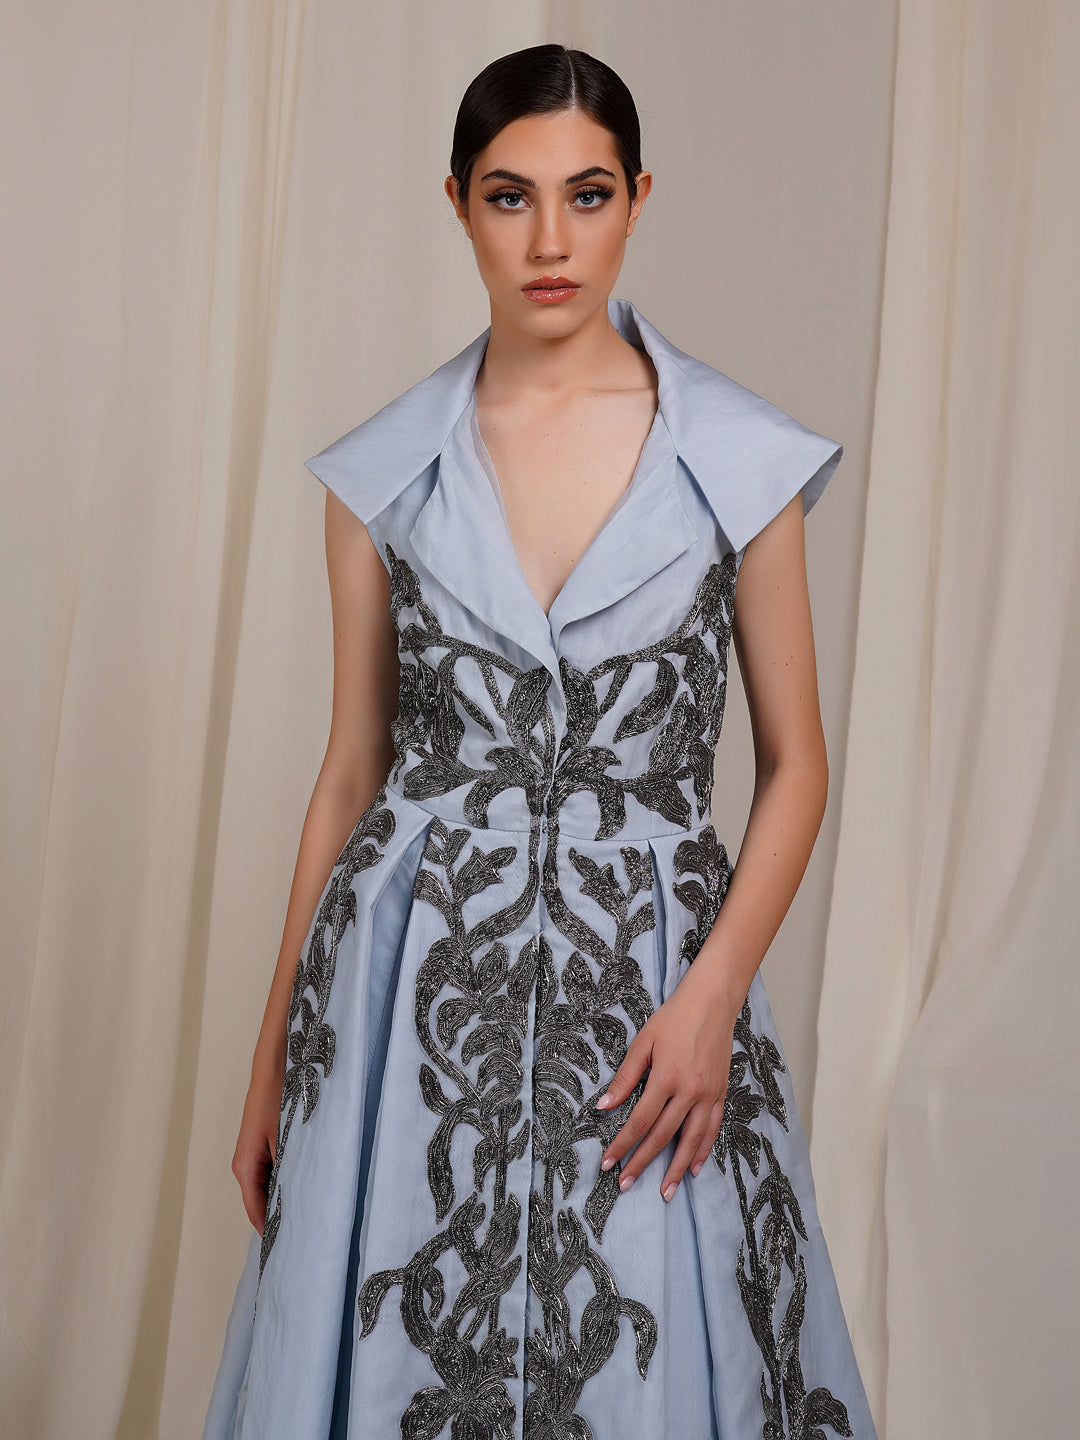 A ice blue organza  silk Floor-Length Dress That Has A Plunging V-Neck